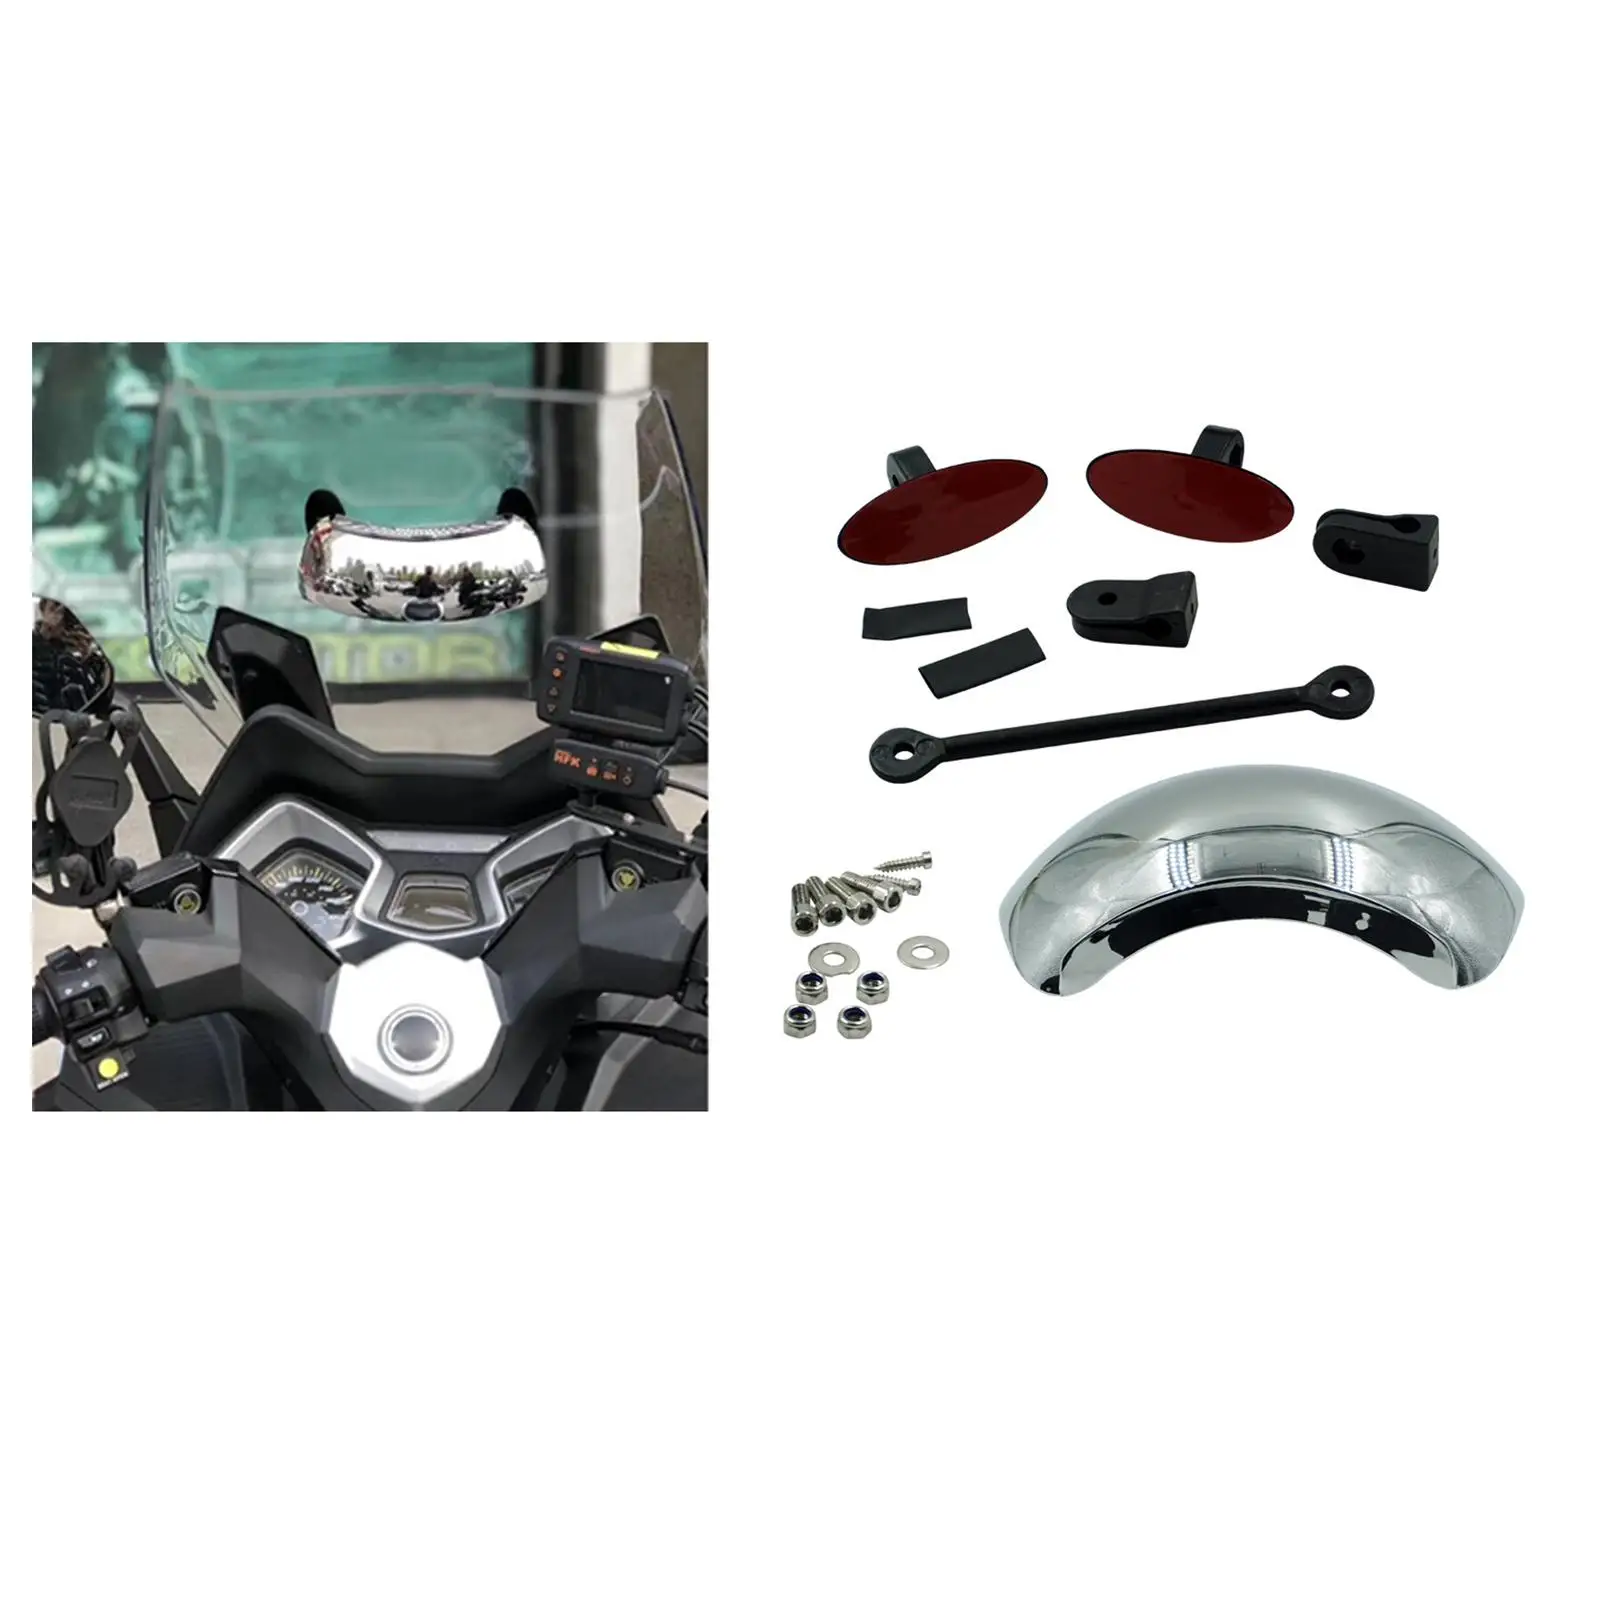 Motorcycle Mirror/ 180 Chromed Central Windscreen Mount Blind Spot Eliminating/